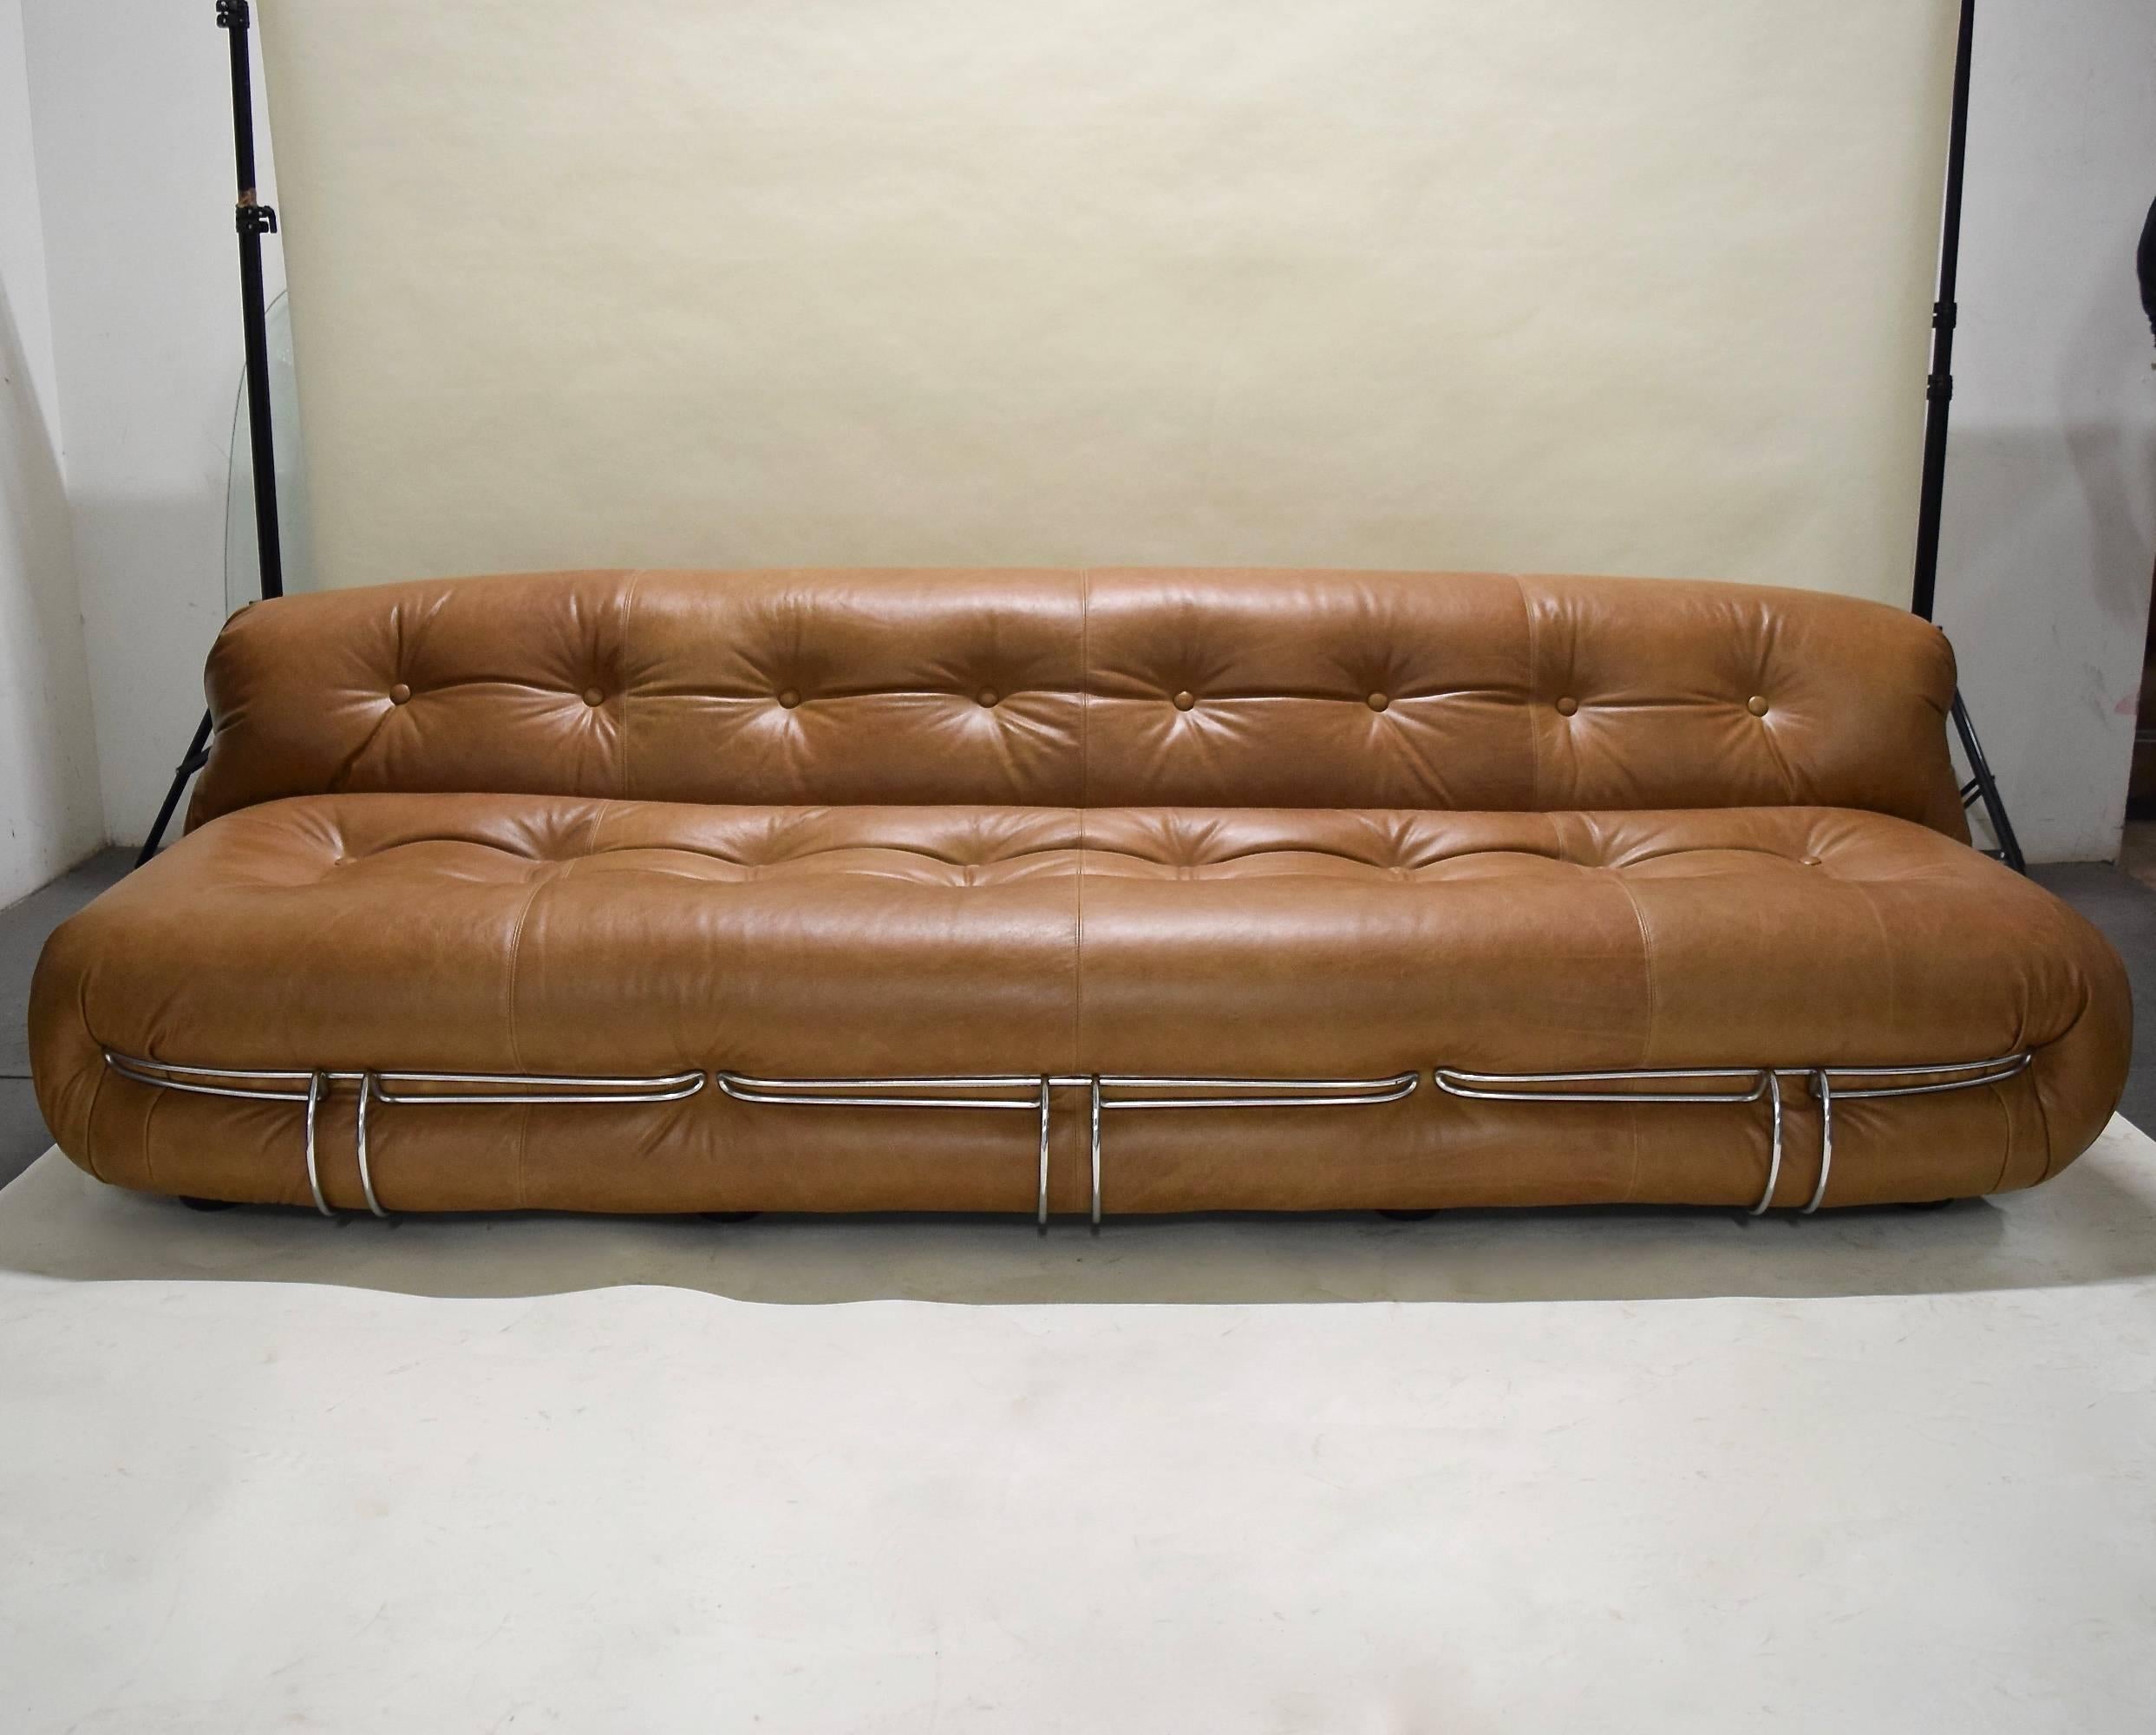 Three-piece Soriana set designed by Tobia Scarpa for Cassina and imported by Atelier International, all pieces in perfect condition and the set includes a large sofa, a chaise longue and ottoman that have all been upholstered in caramel colored